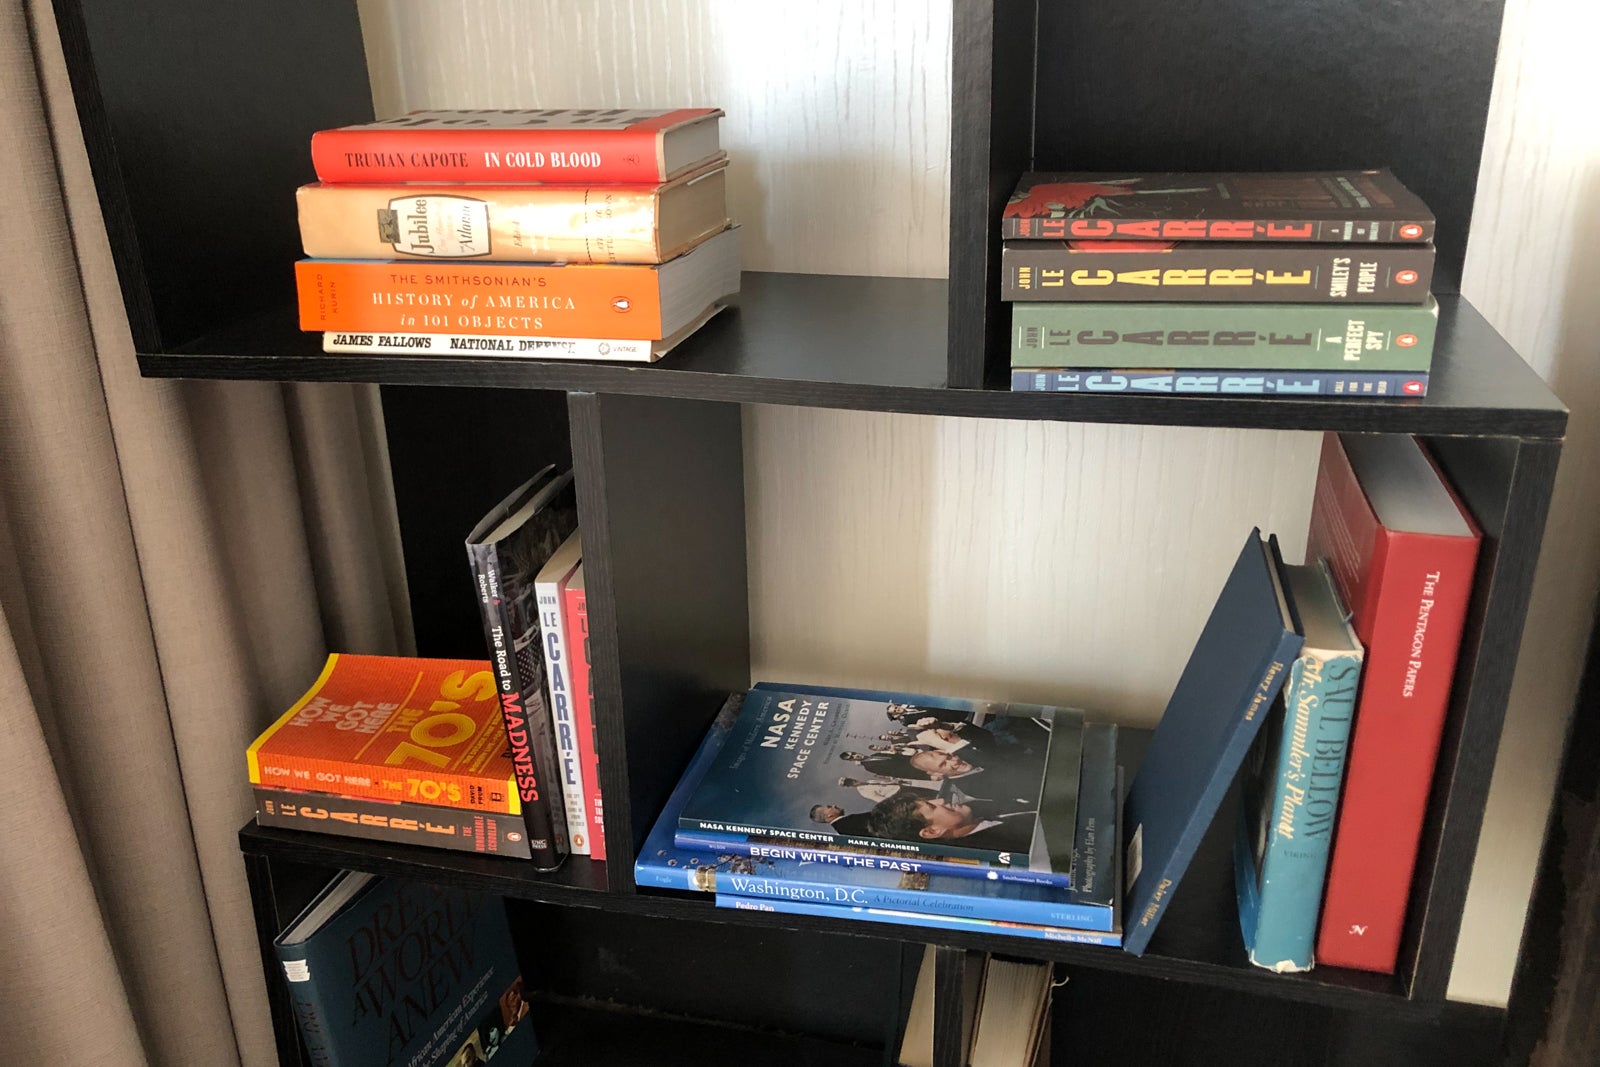 The Scandal Room's bookshelf houses a number of appropriate books, including spy novels and a copy of the Pentagon Papers.